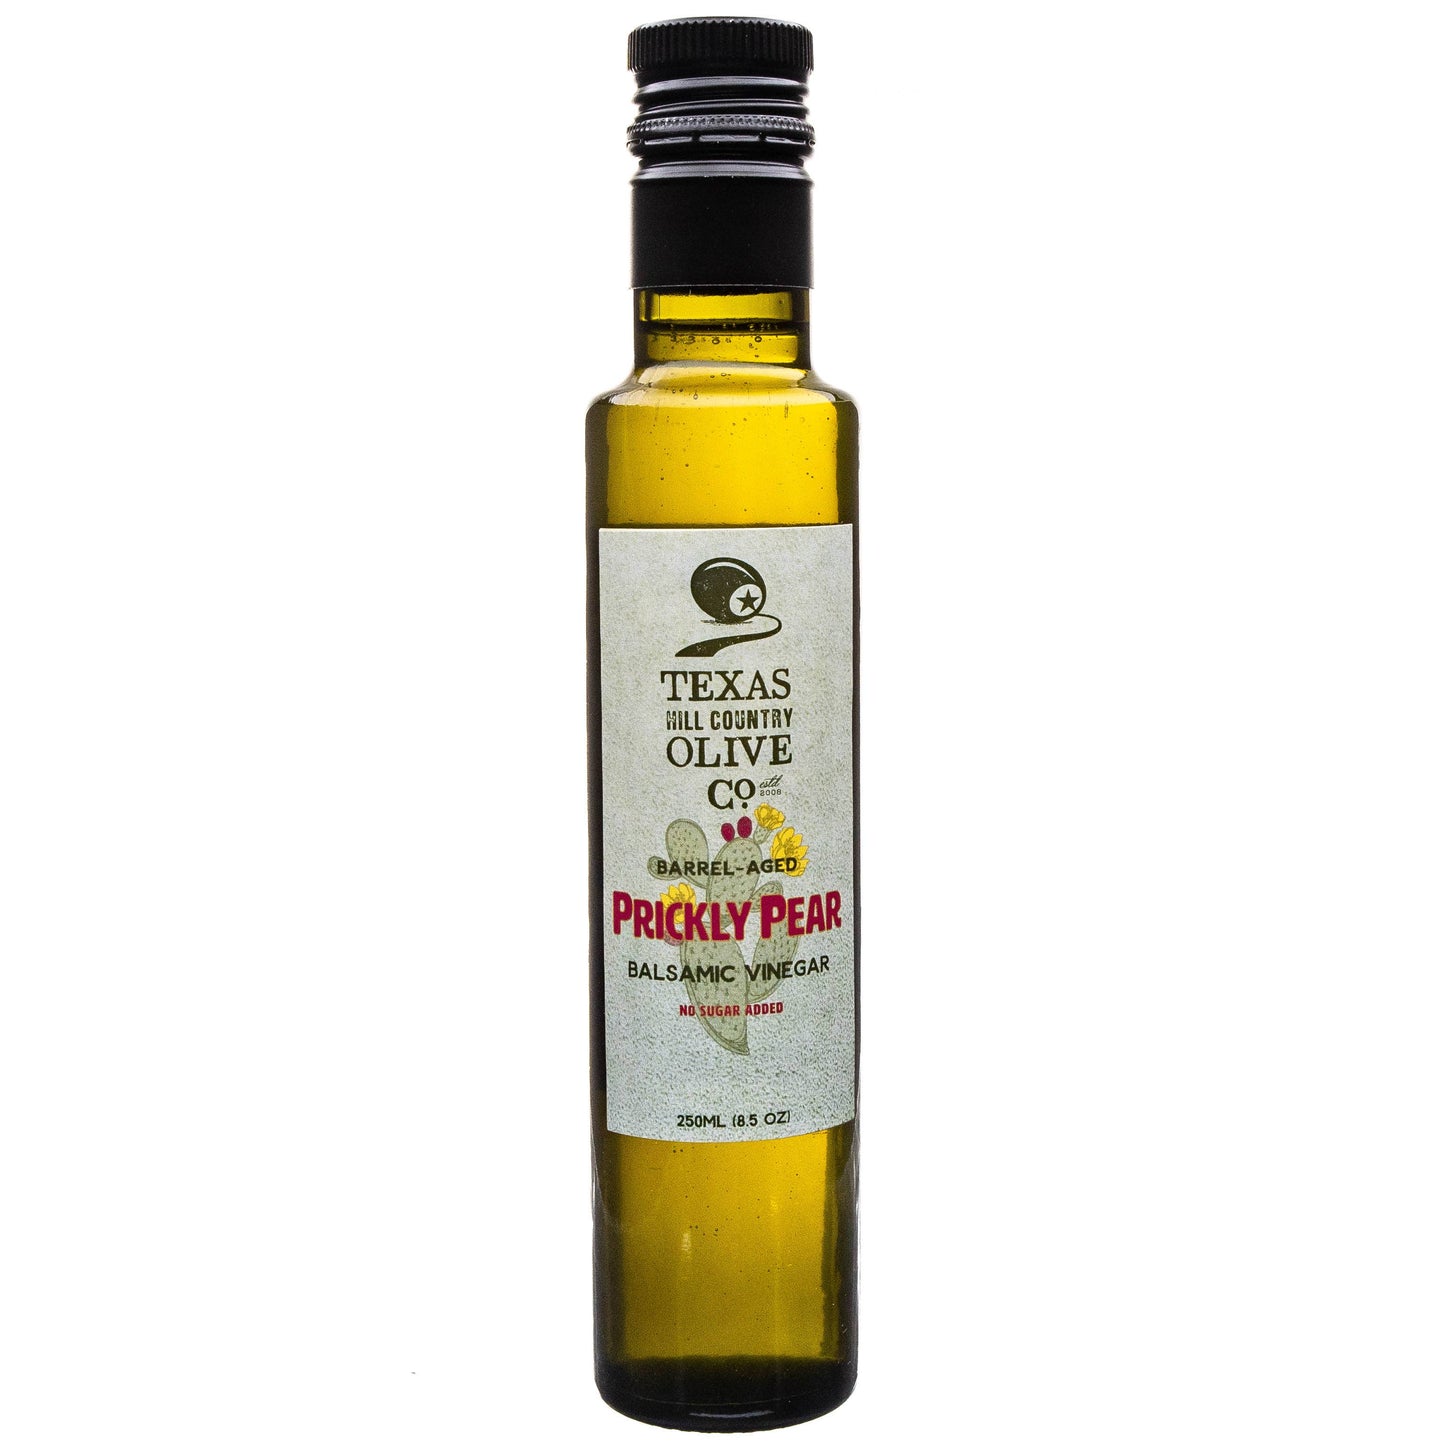 Texas Hill Country Olive Co. - Prickly Pear Balsamic Vinegar - 250ml